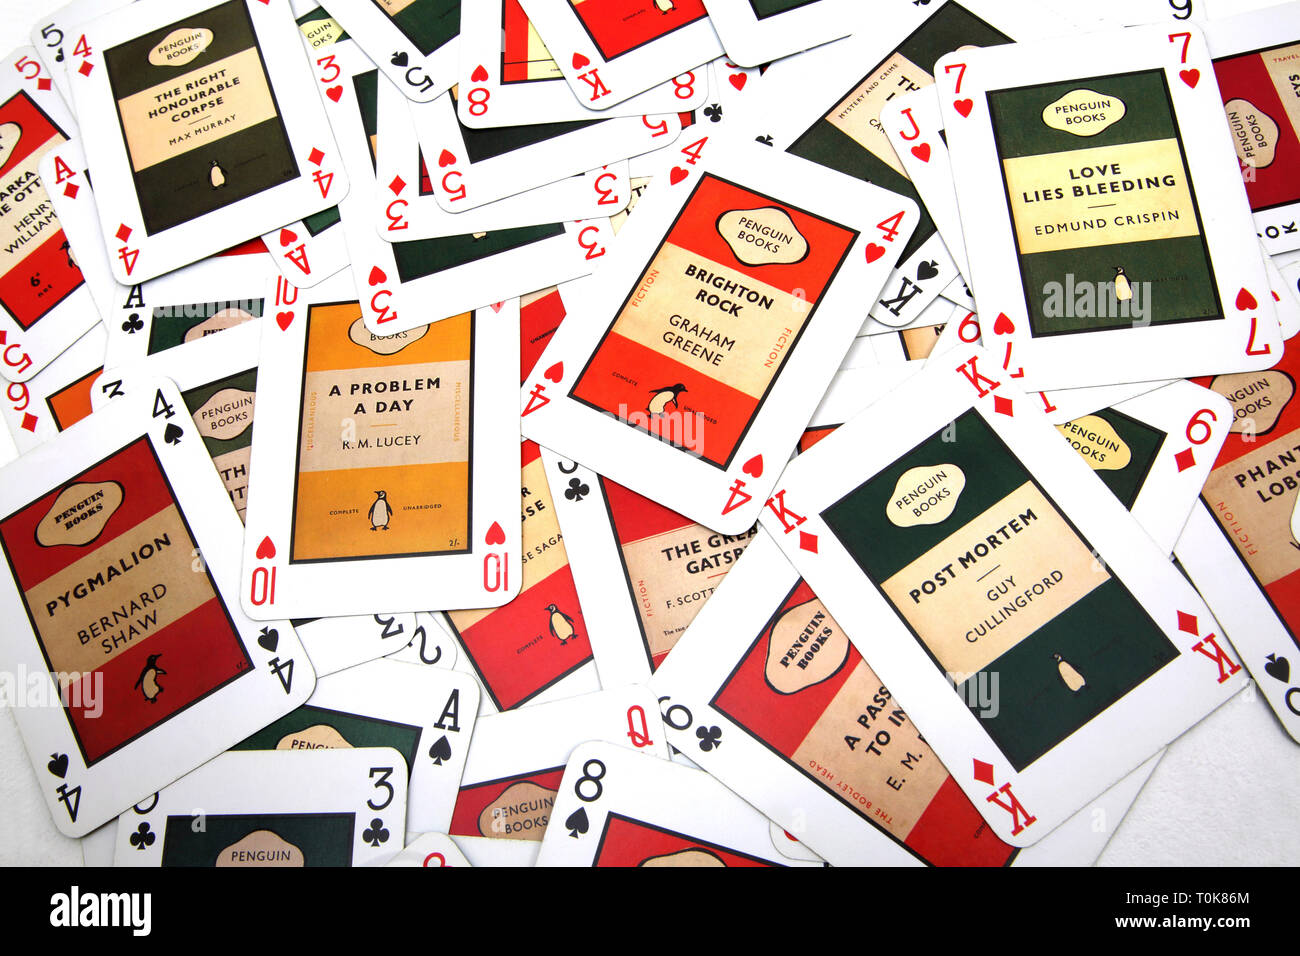 Vintage Penguin Books Playing Cards Celebrating Sixty Penguin Years - with Titles of Classic Books Stock Photo